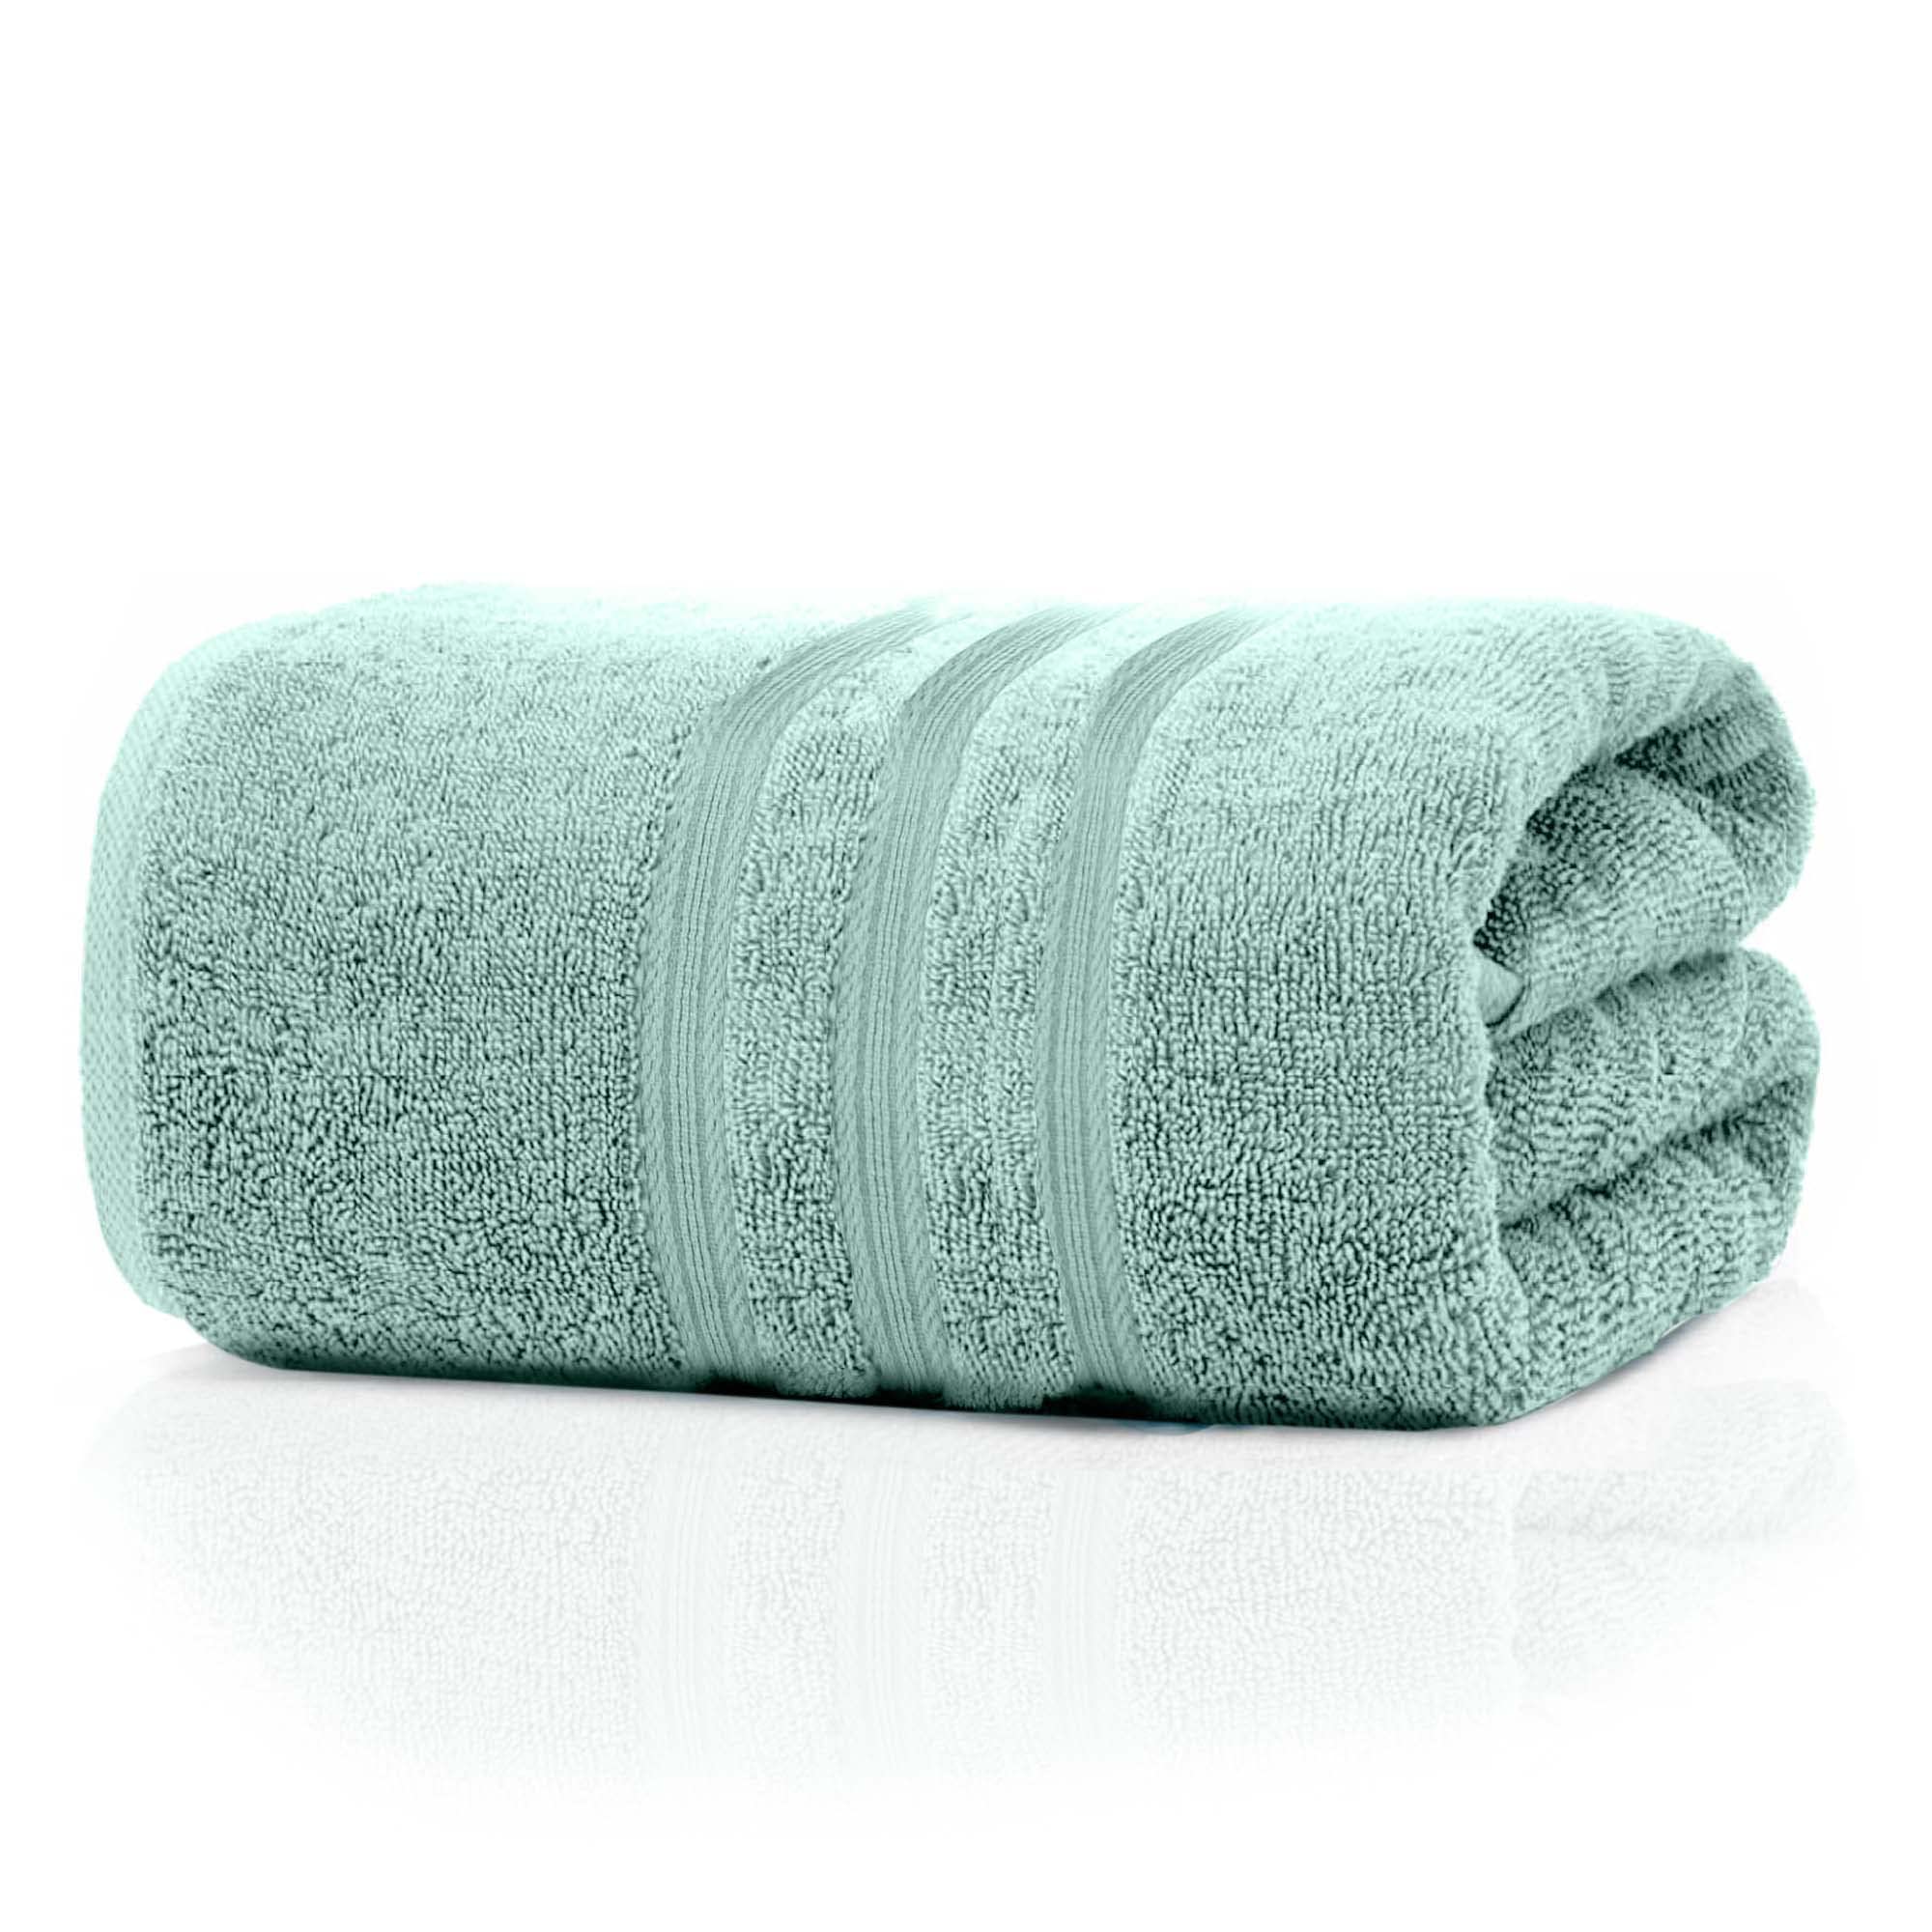 Pierre Donna Bath Towel, Highly Absorbent (green)